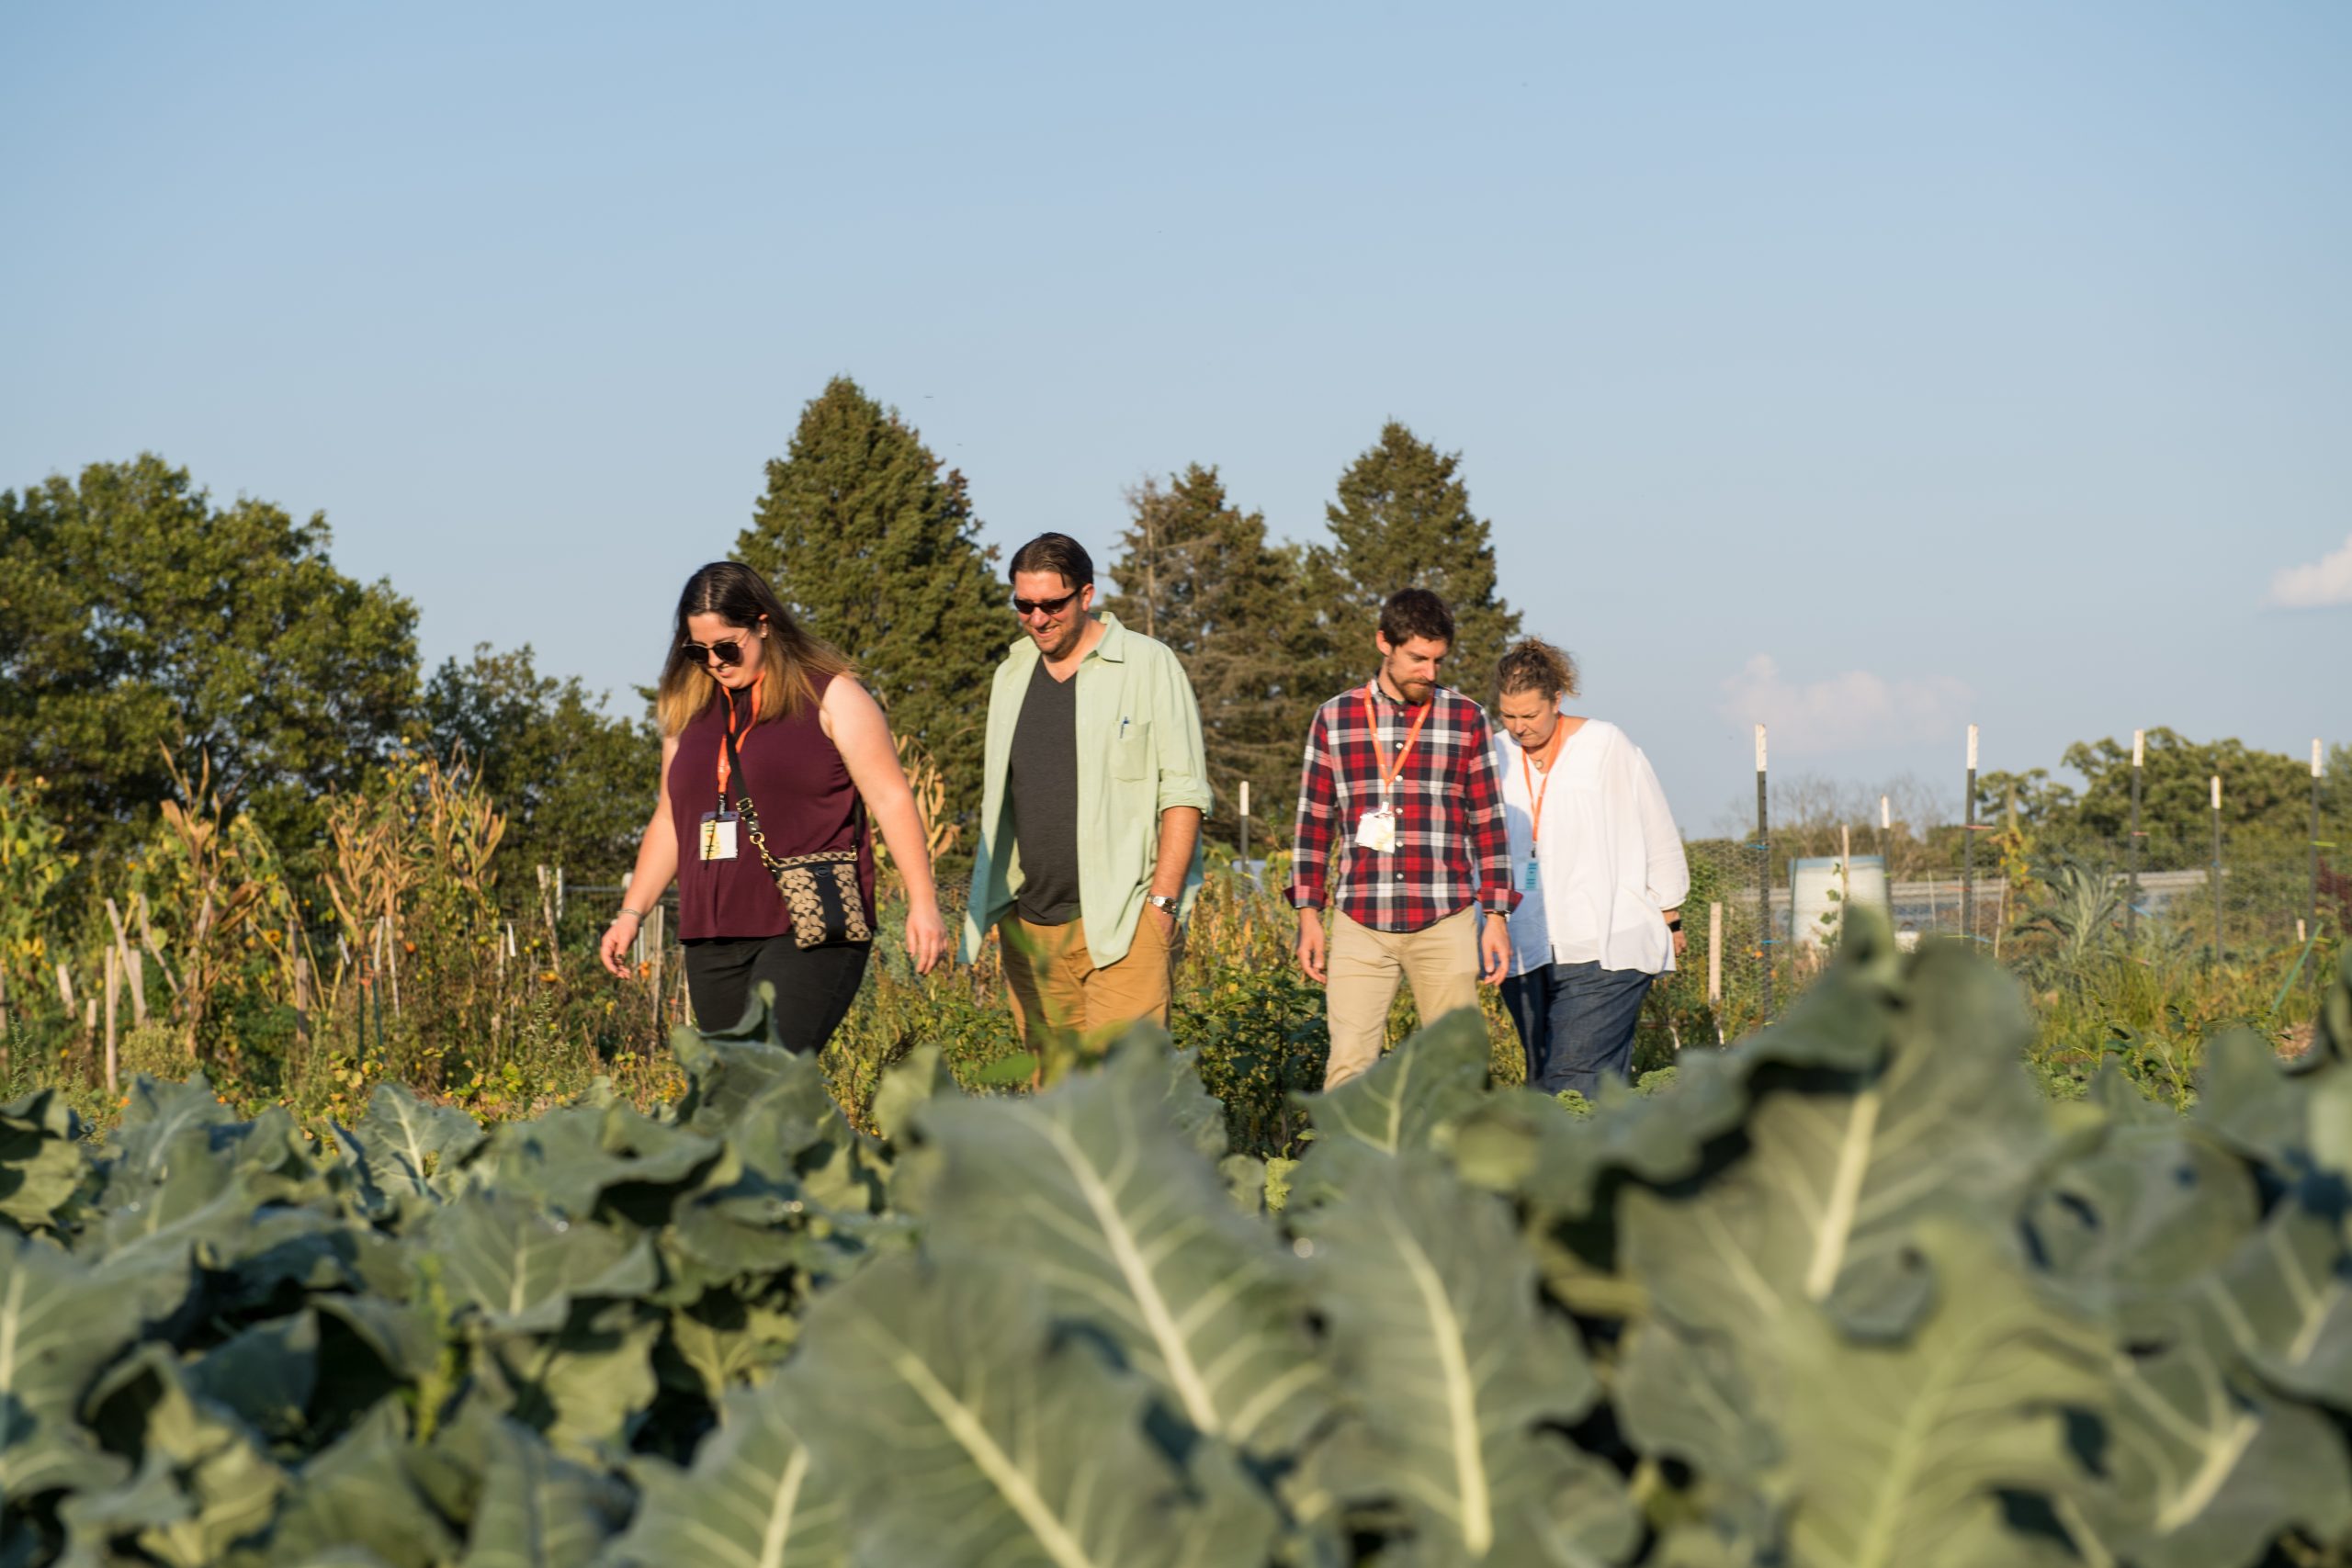 University of Michigan staff walking through a field of produce at the UM Campus Farm.